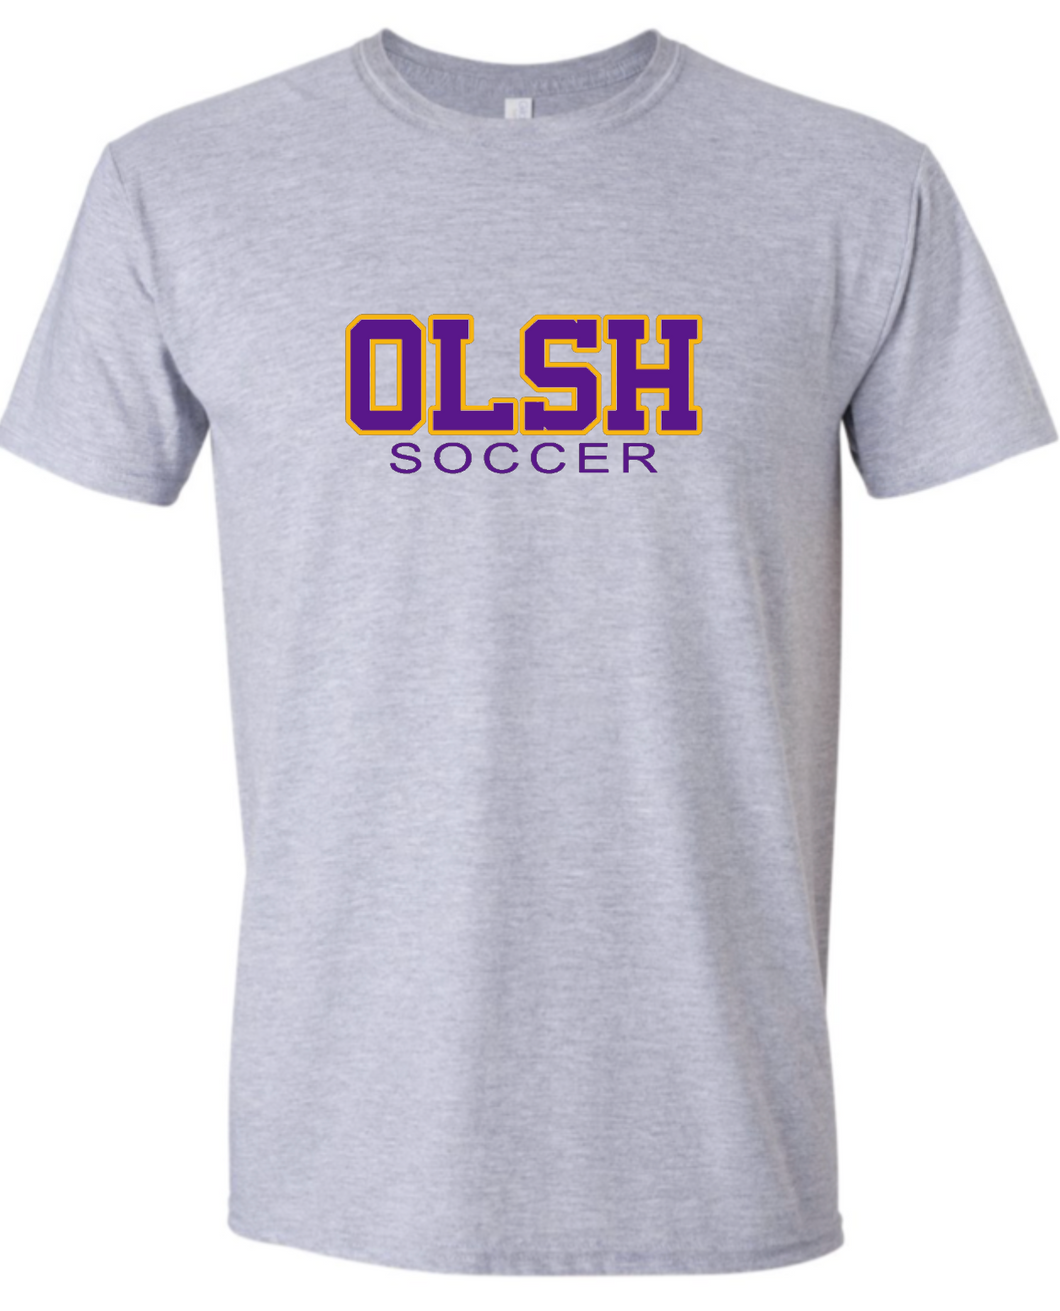 OLSH SOCCER YOUTH & ADULT SOFTSTYLE COTTON JERSEY SHORT SLEEVE T-SHIRT  - SPORT GREY